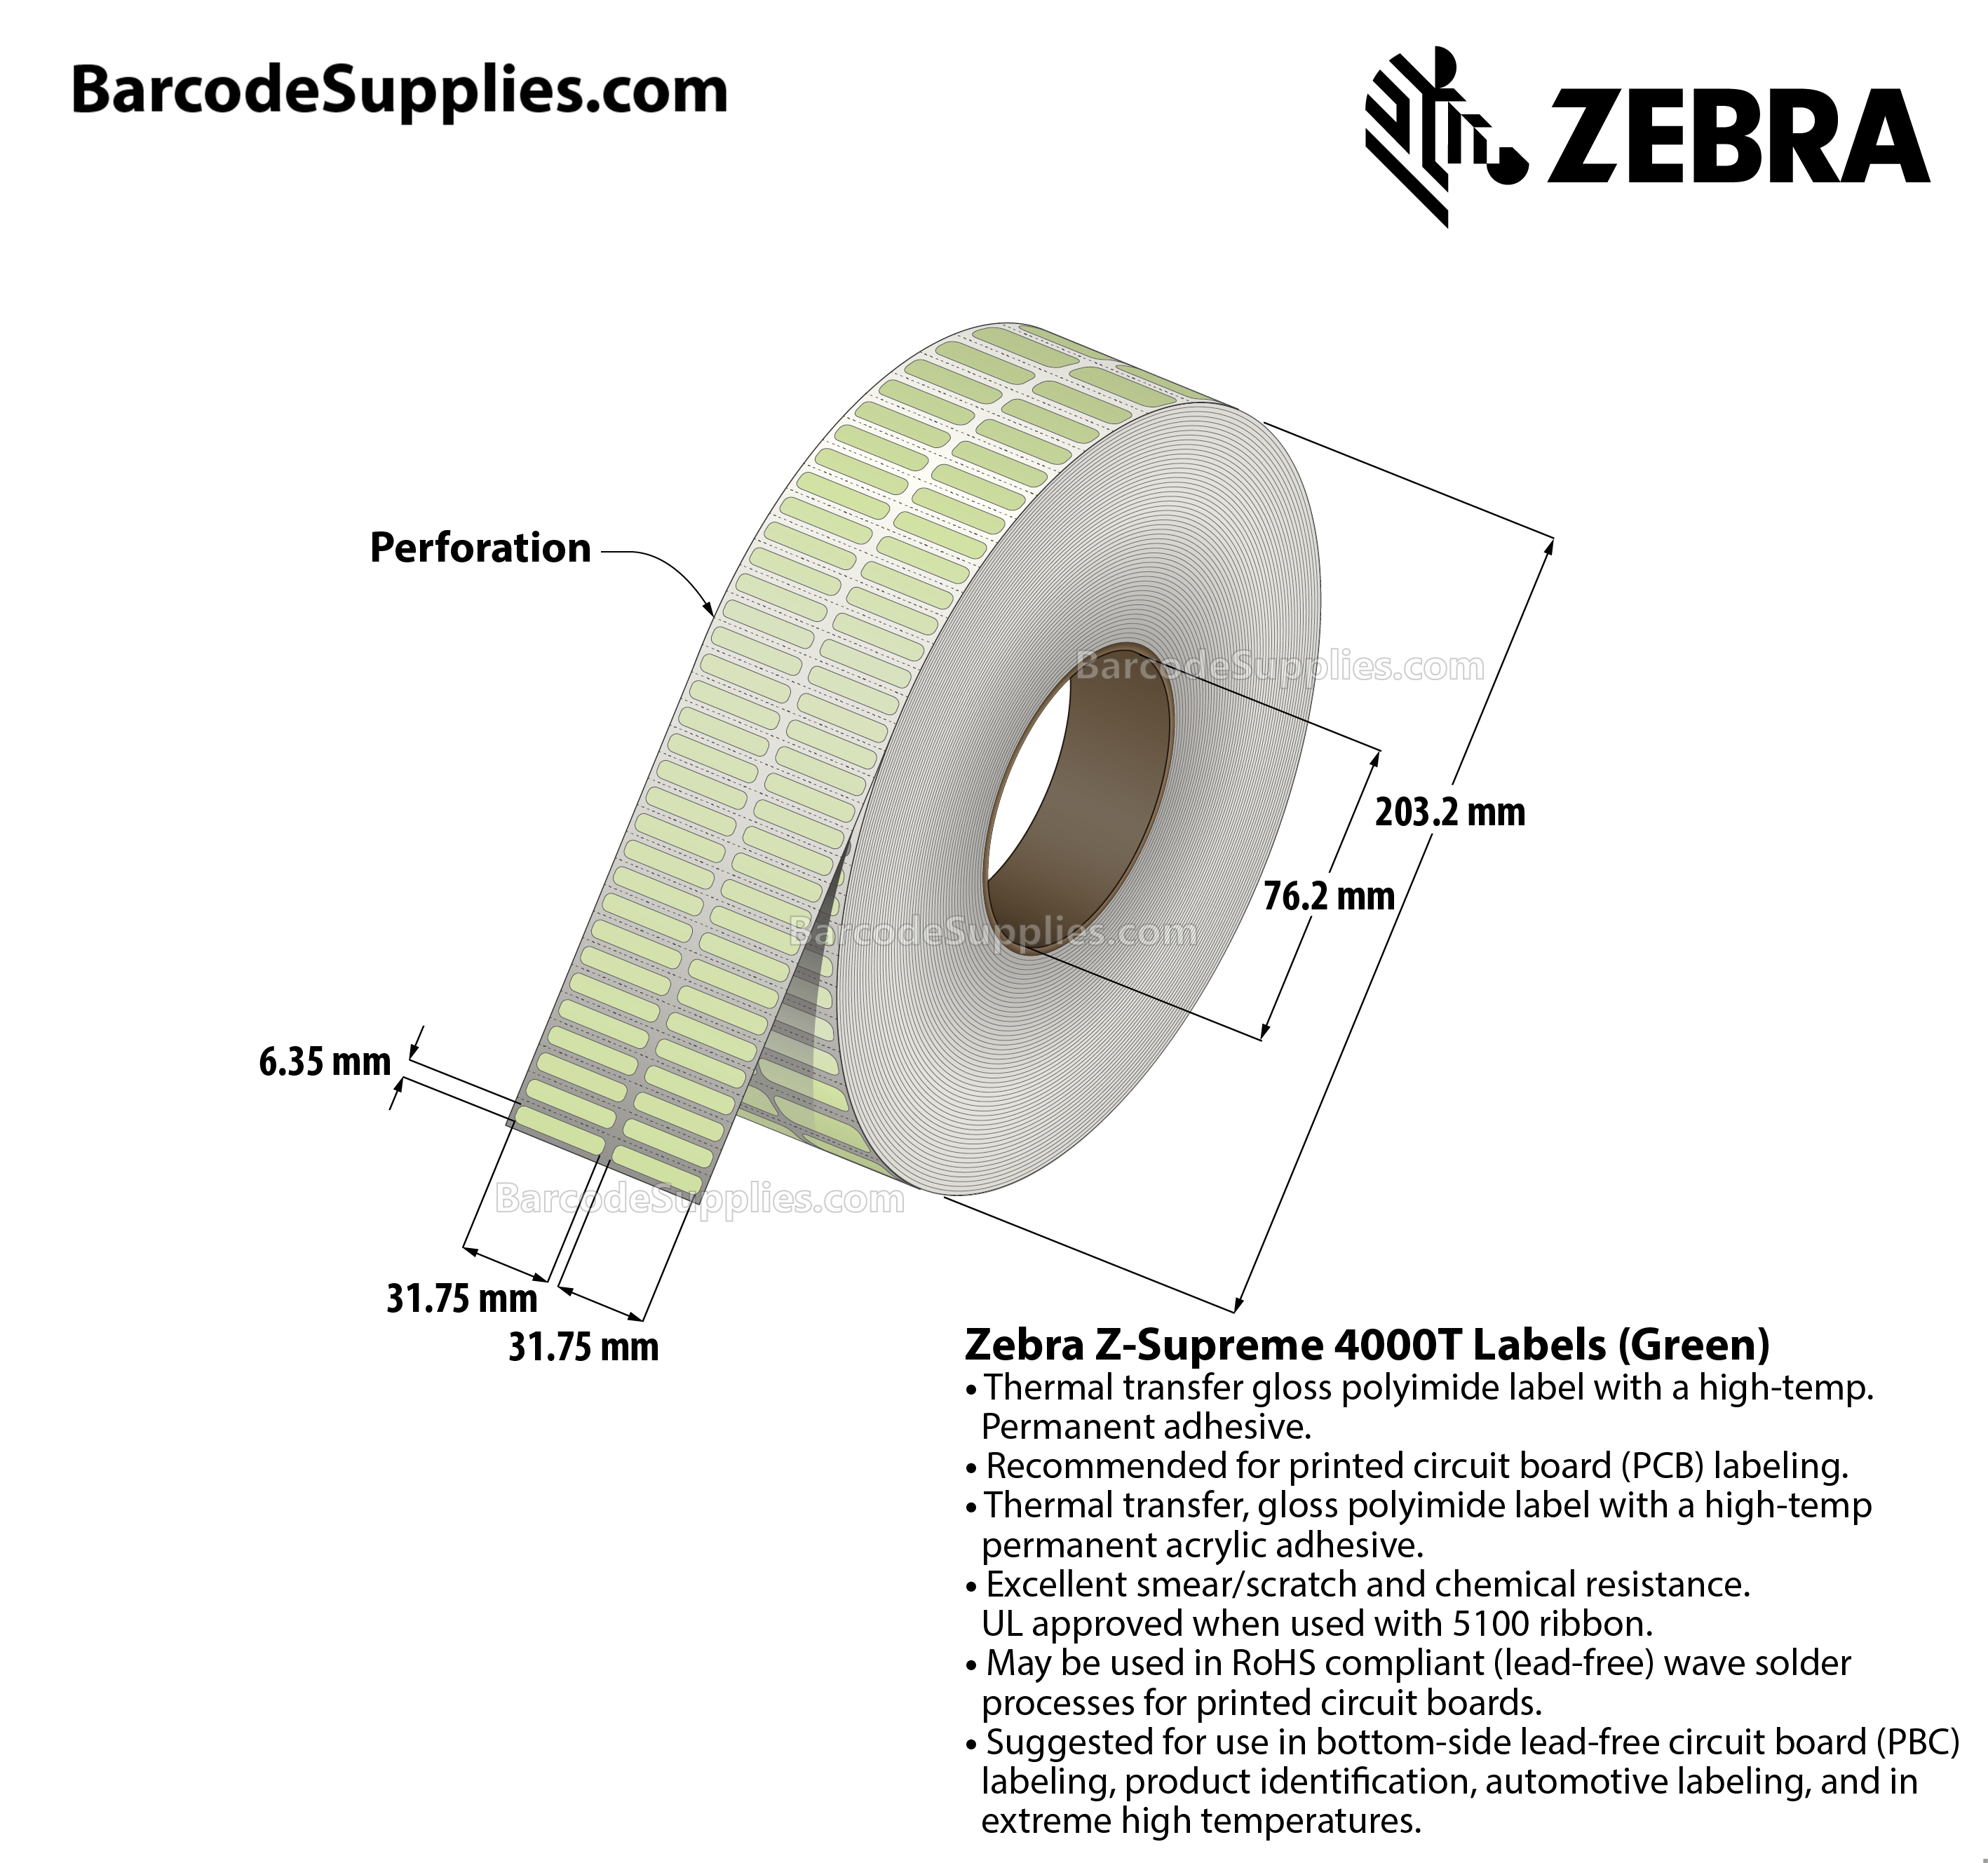 1.25 x 0.25 Thermal Transfer Green Z-Supreme 4000T Green (2-Across) Labels With High-temp Adhesive - Perforated - 10000 Labels Per Roll - Carton Of 1 Rolls - 10000 Labels Total - MPN: 10023319